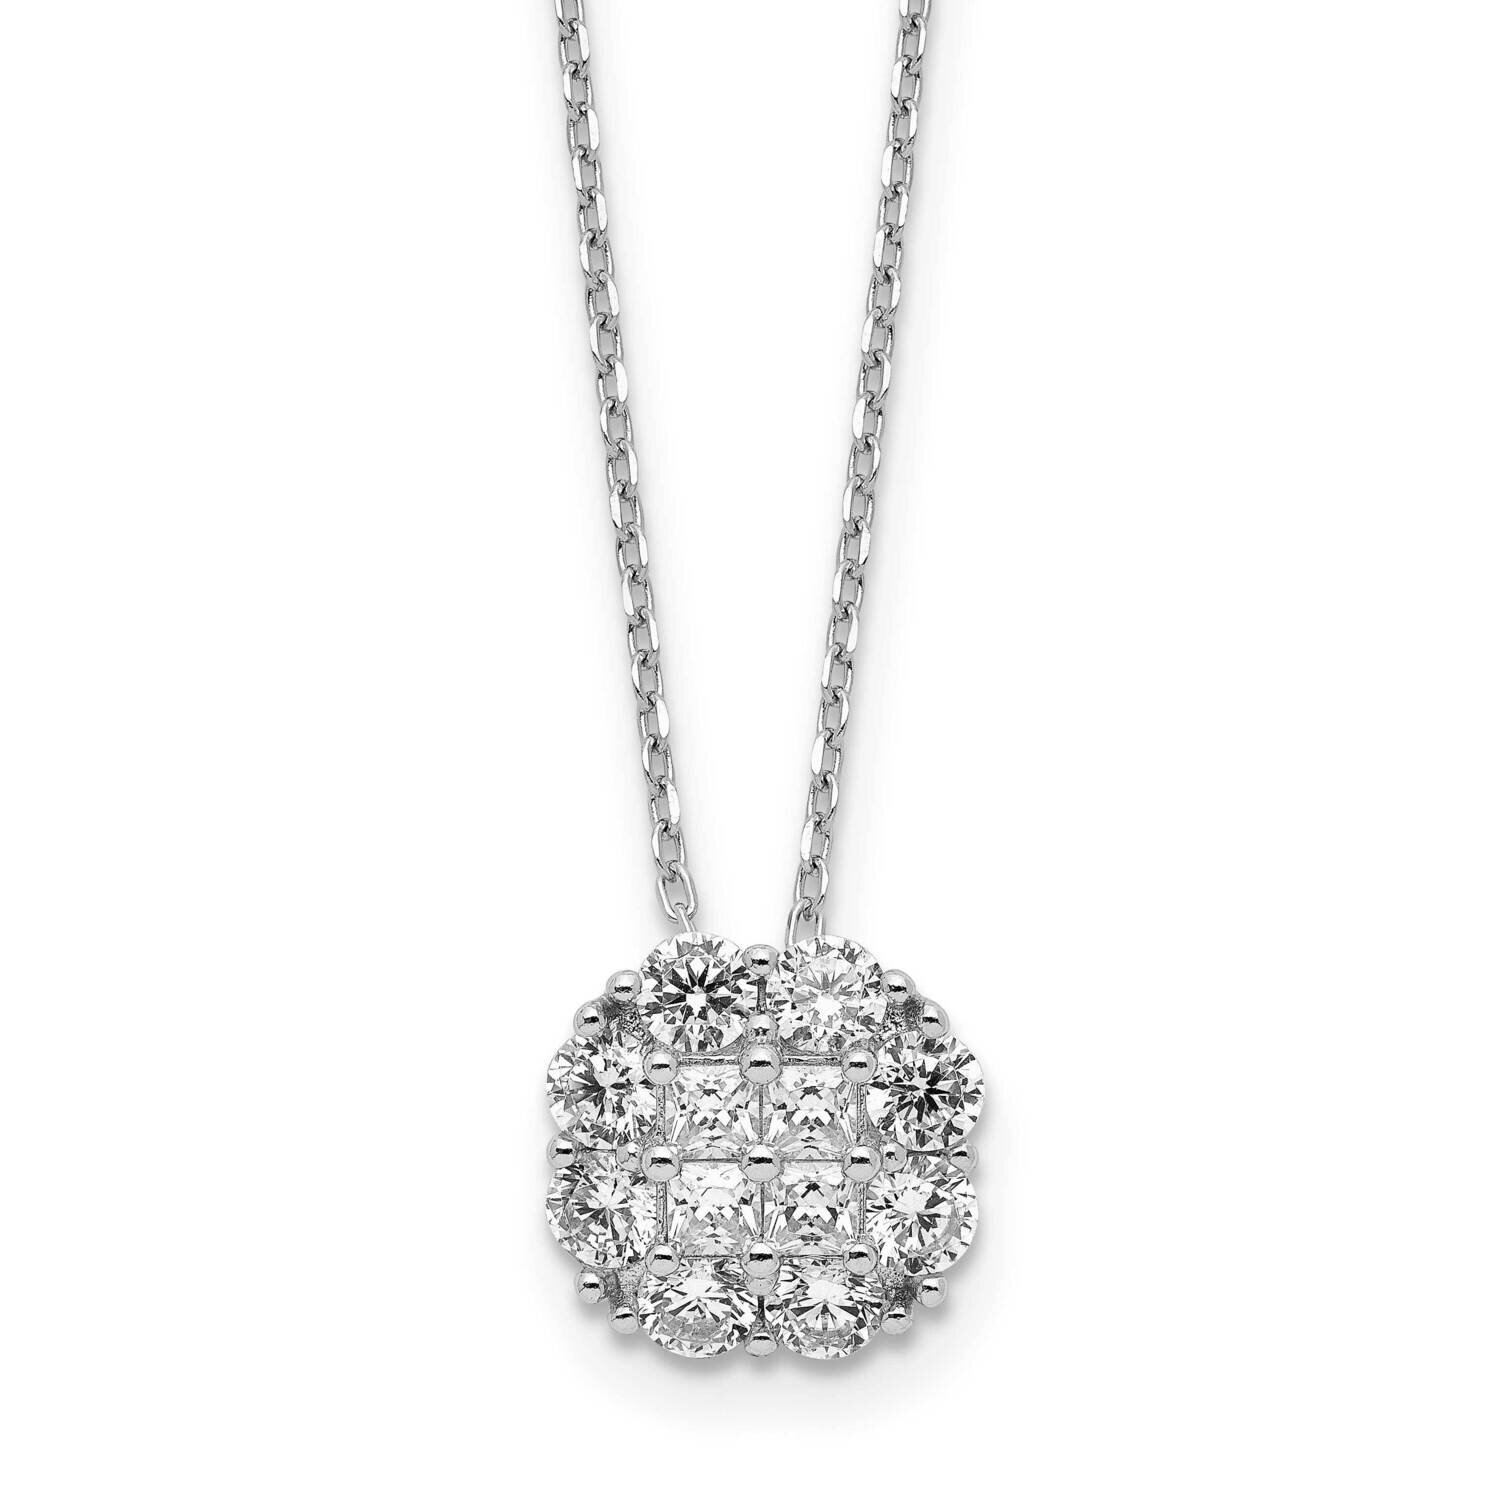 CZ Diamond with 2 In Extender Necklace 16 Inch Sterling Silver Rhodium-Plated Polished QG6118-16